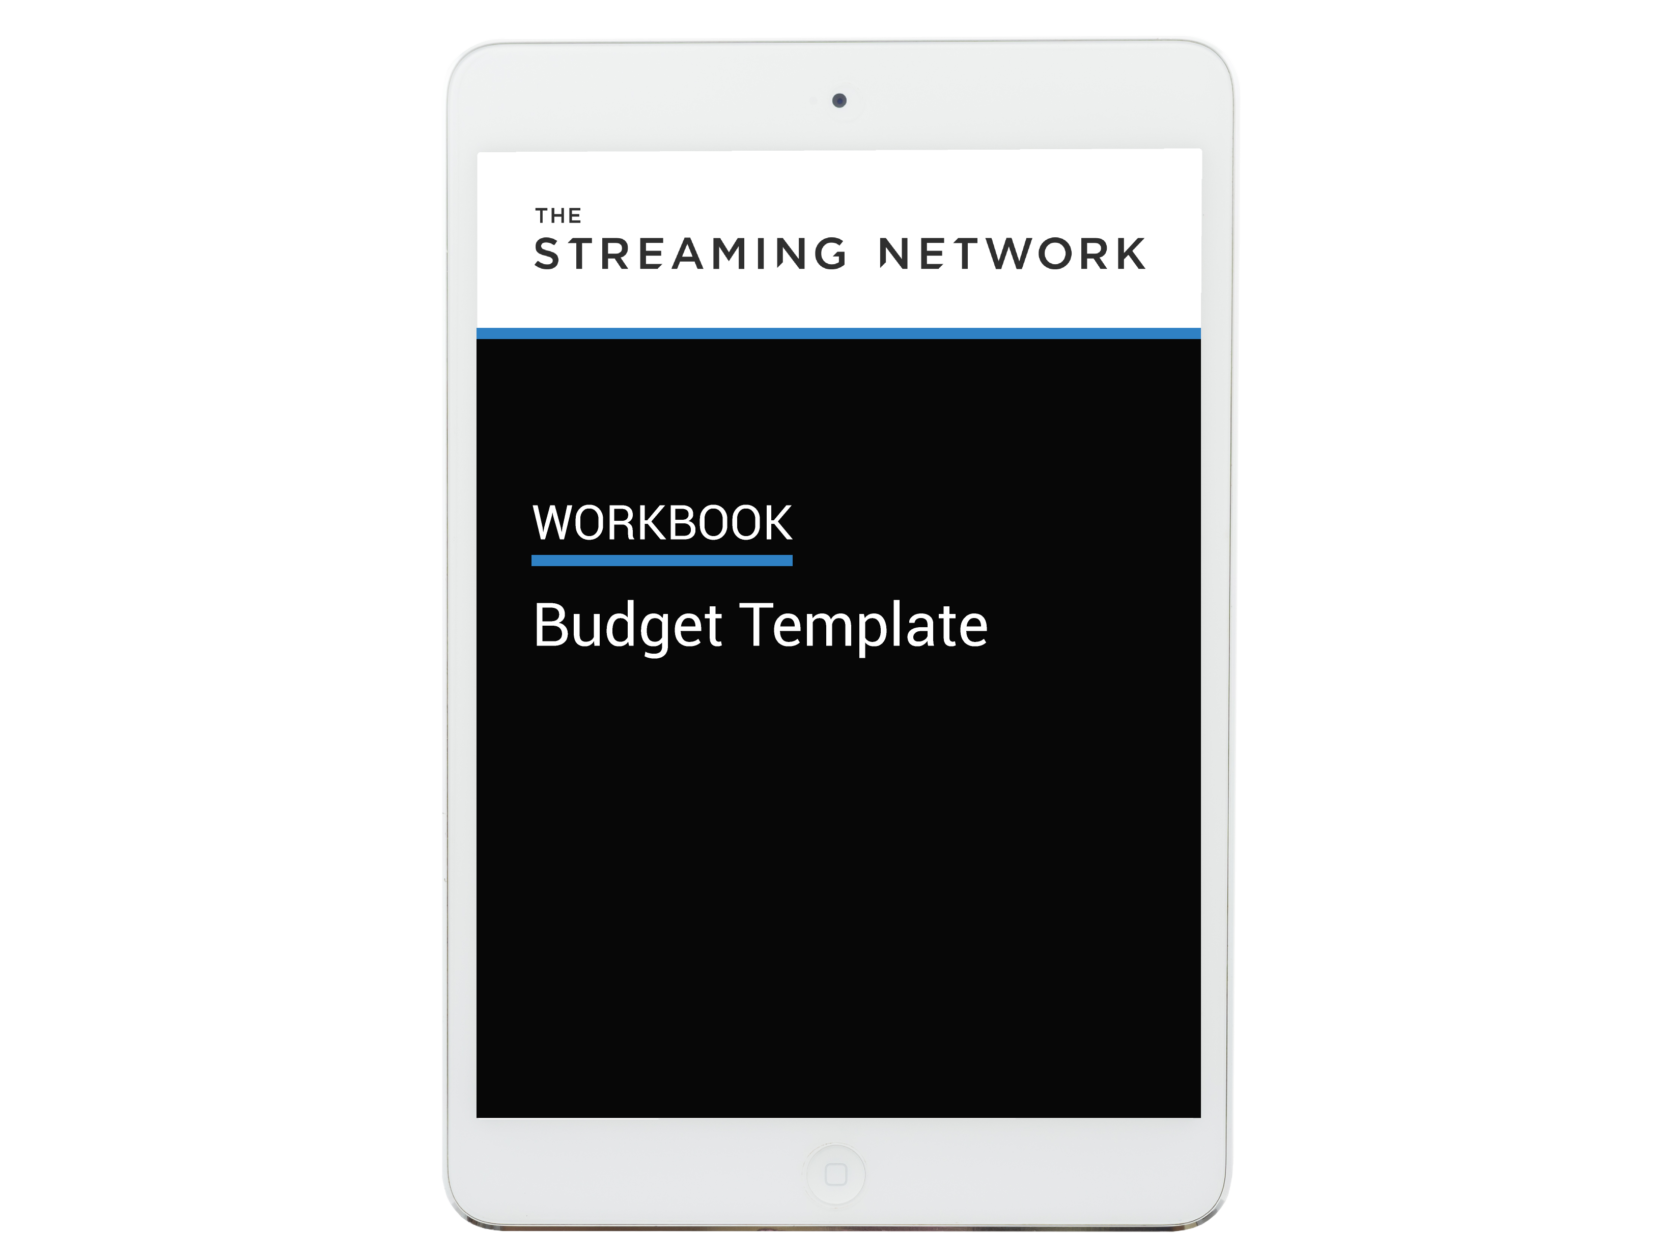 Budget-Template-Image